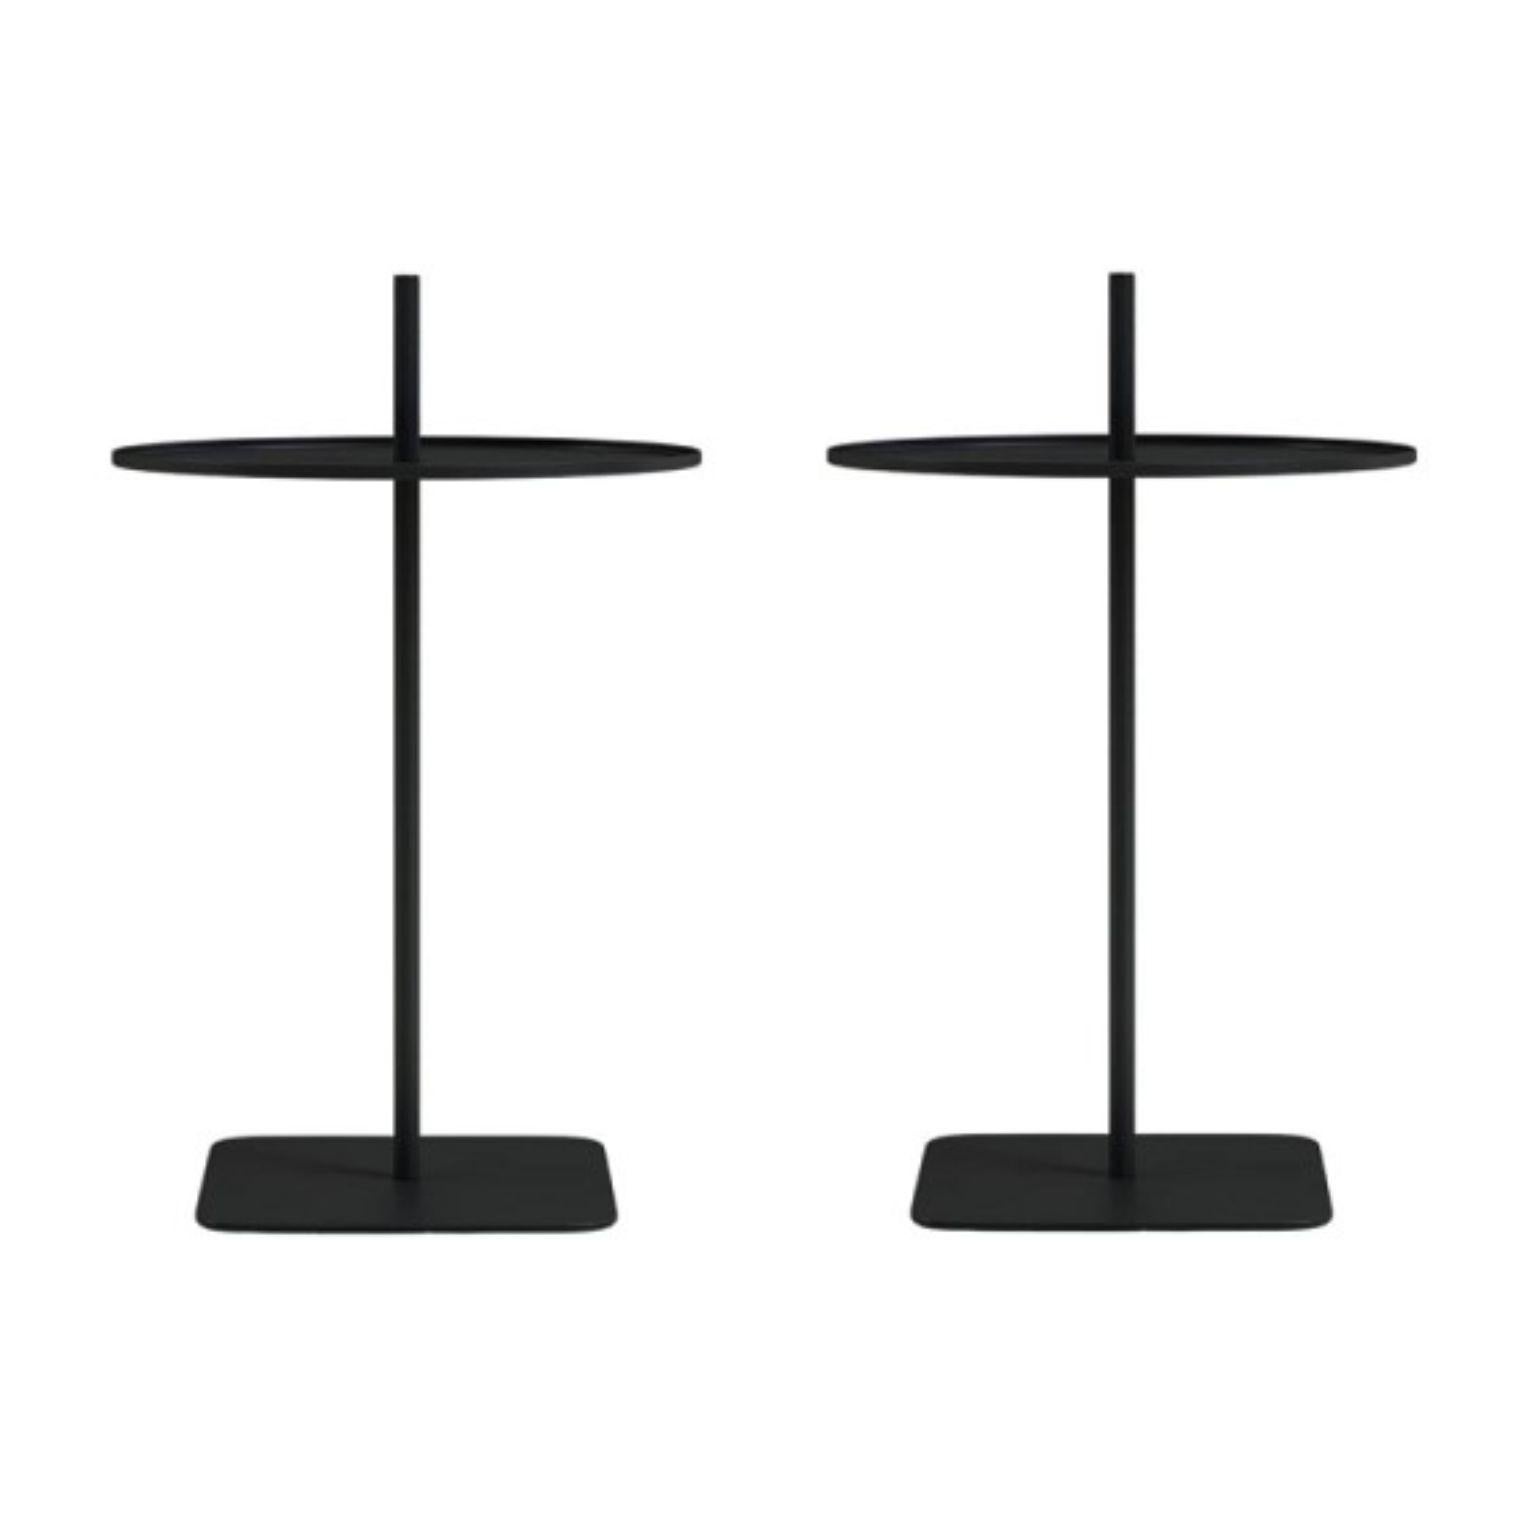 Set of 2 spin 01 black coffee tables by Oito
Dimensions: D41x W41 x H68 cm
Materials: Powder coated steel
Weight: 5 kg
Also Available in different colours.
Suitable for outdoor use.
Assembly design. Registered design.

The idea of ?a coffee